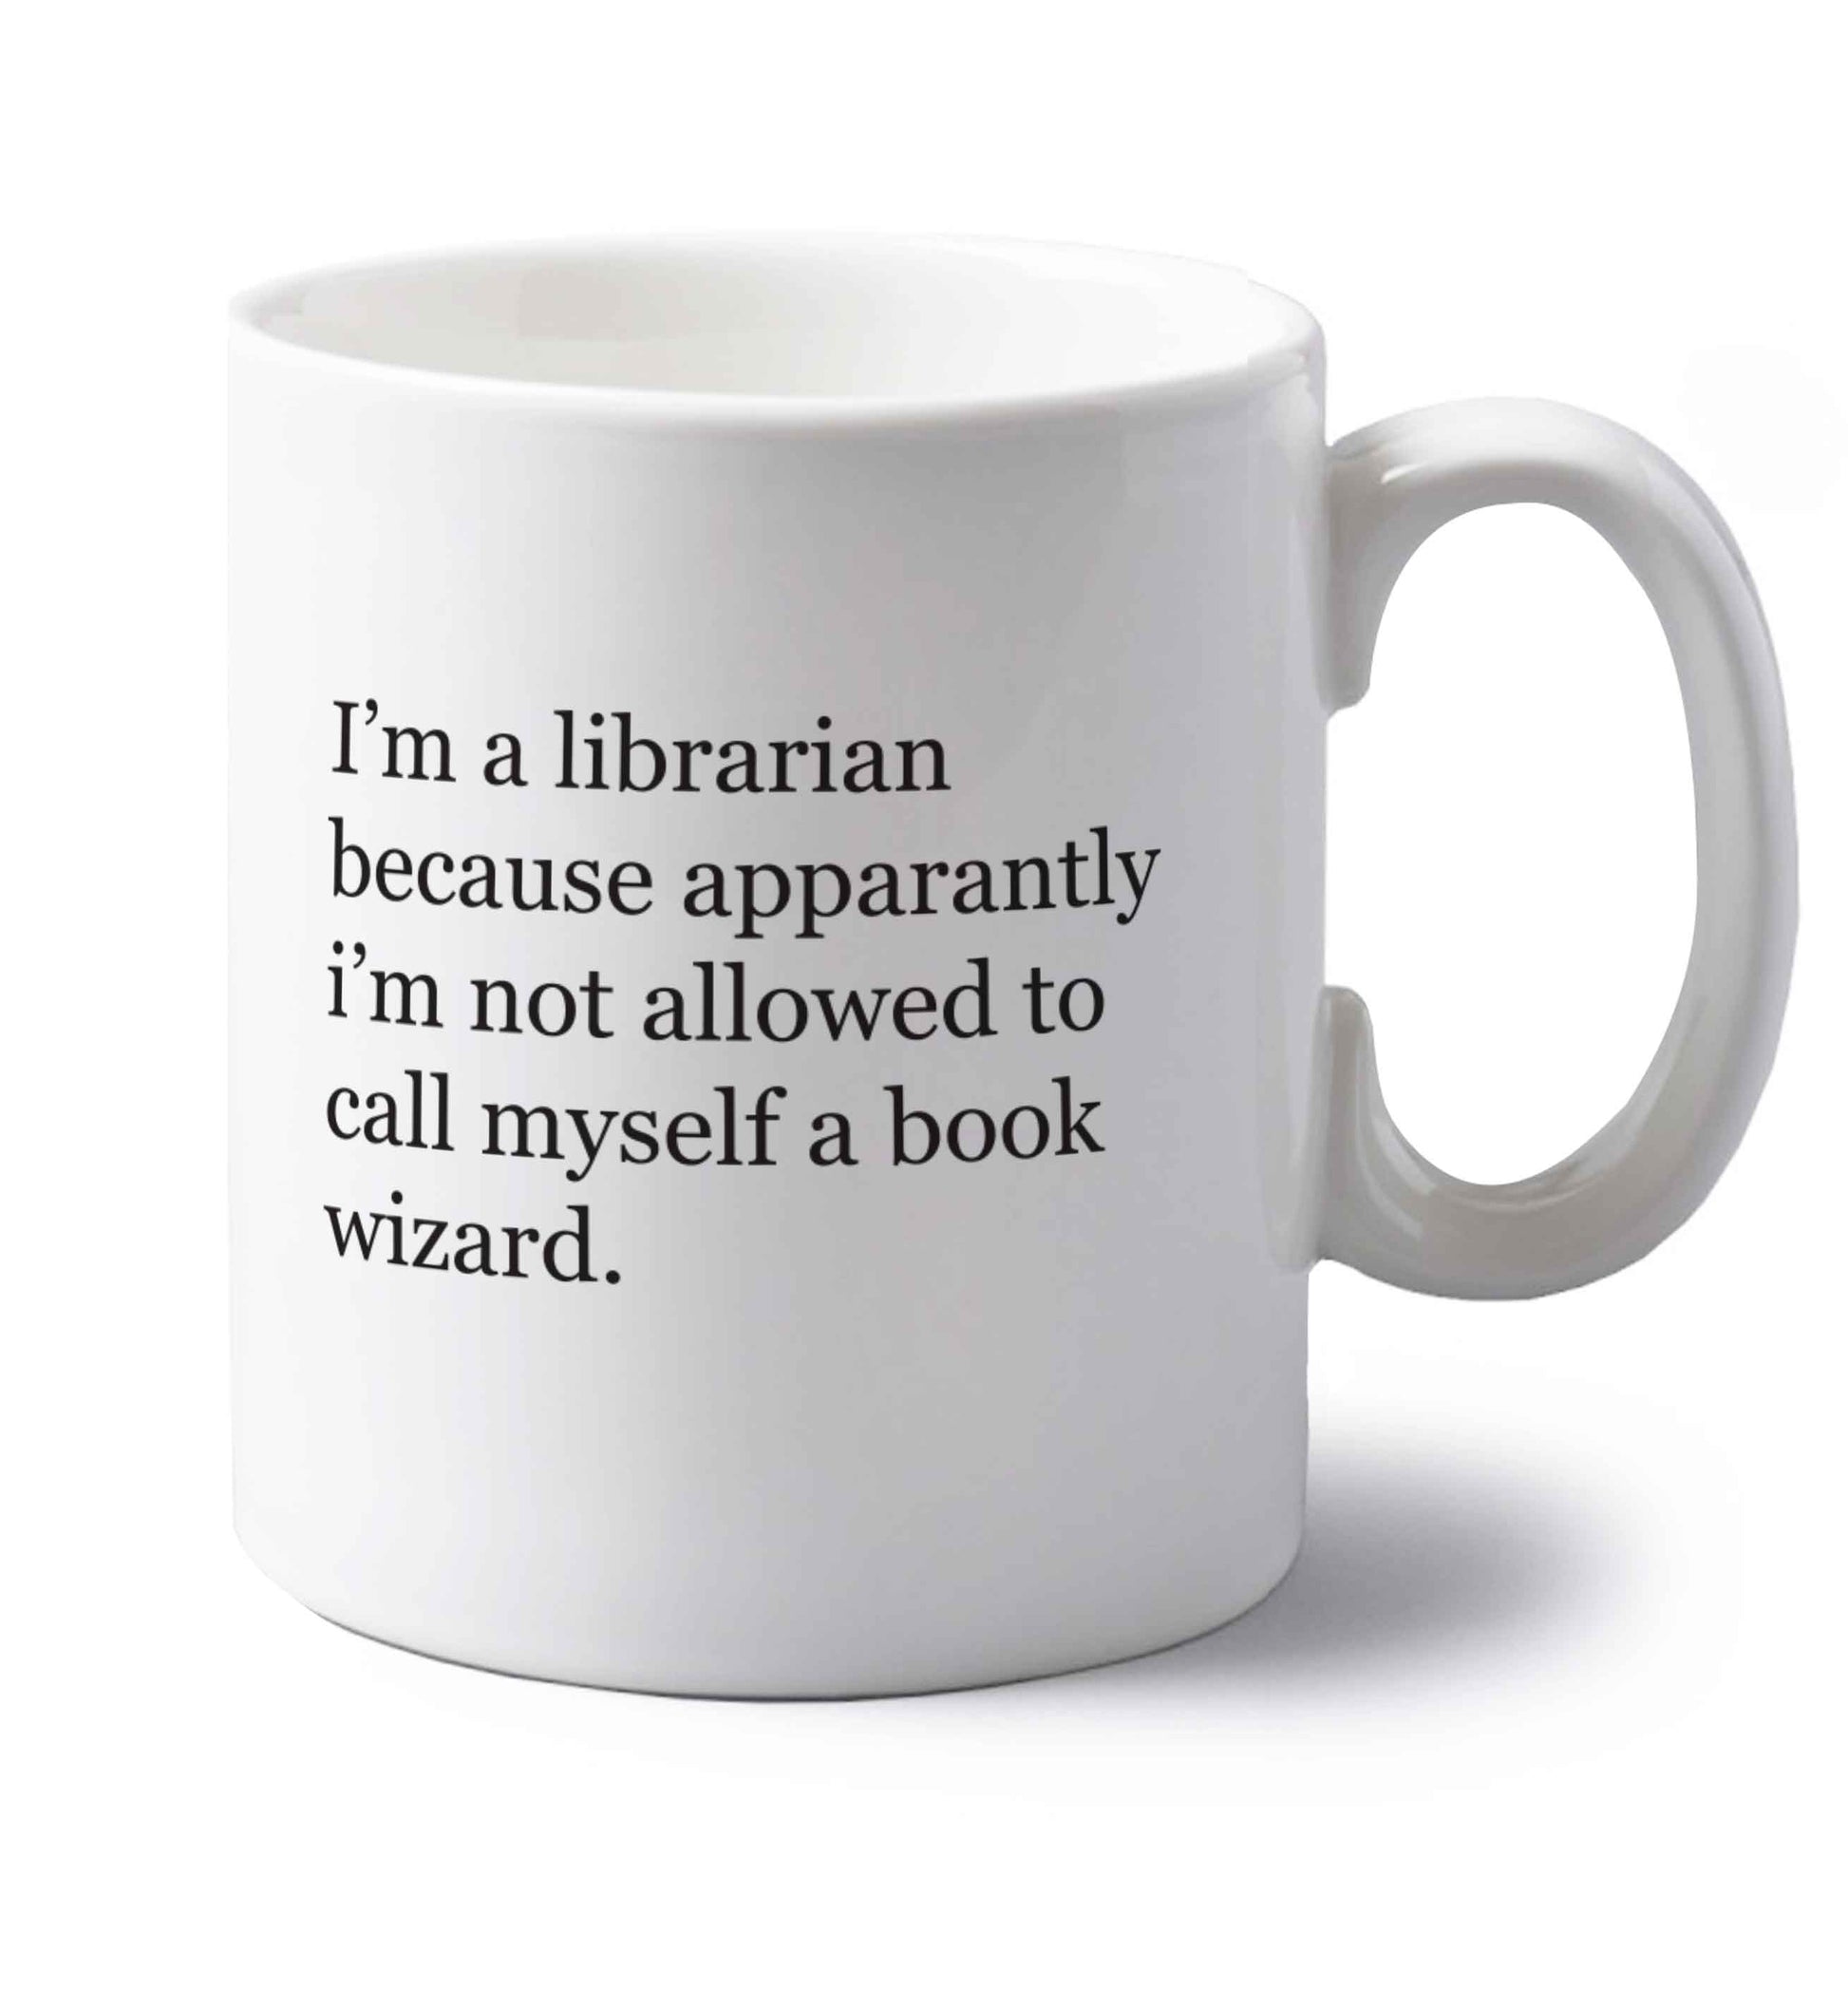 iÕm a librarian because apparantly iÕm not allowed to call myself a book wizard left handed white ceramic mug 